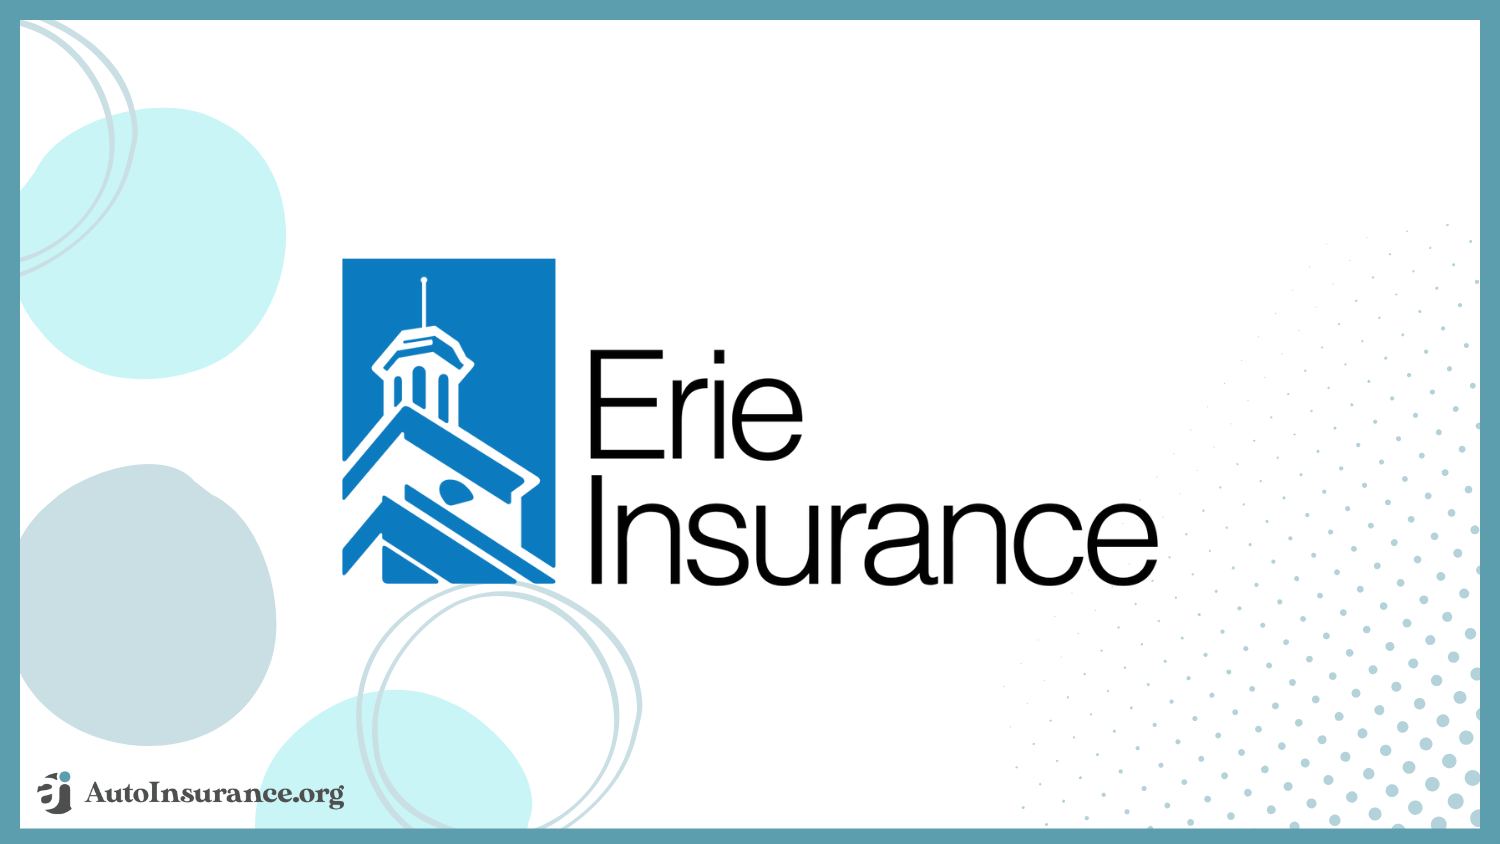 Erie Insurance: Best Auto Insurance Companies According to Consumer Reports